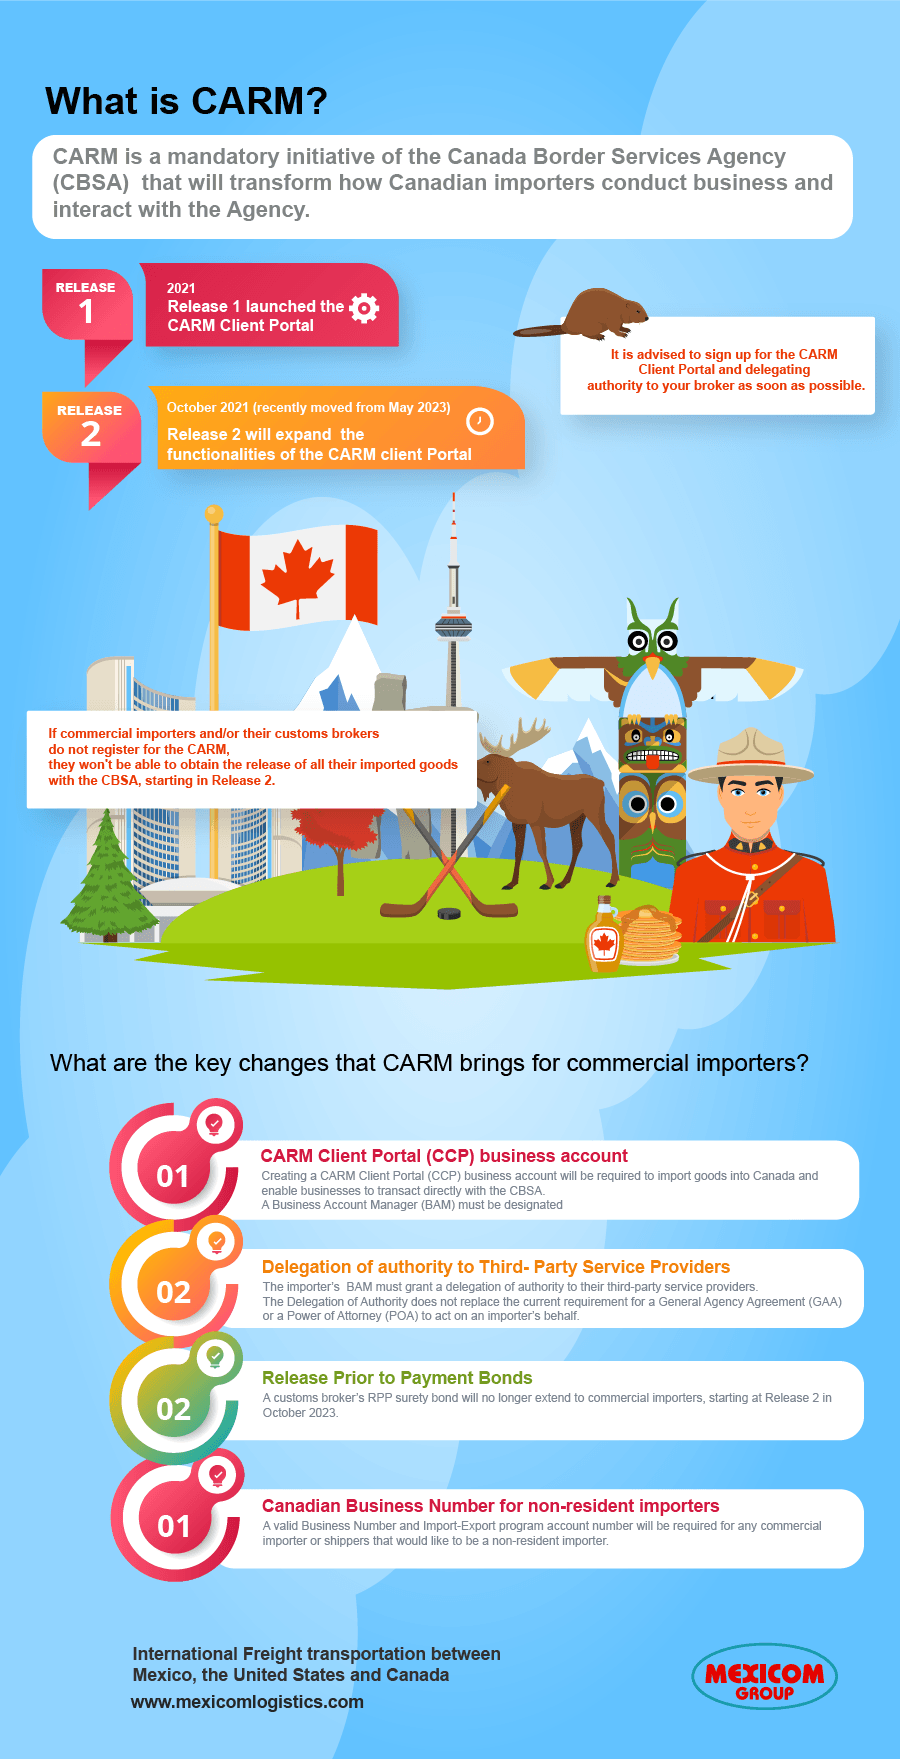 What is CARM an initiative of the CBSA fro Canadian Importers